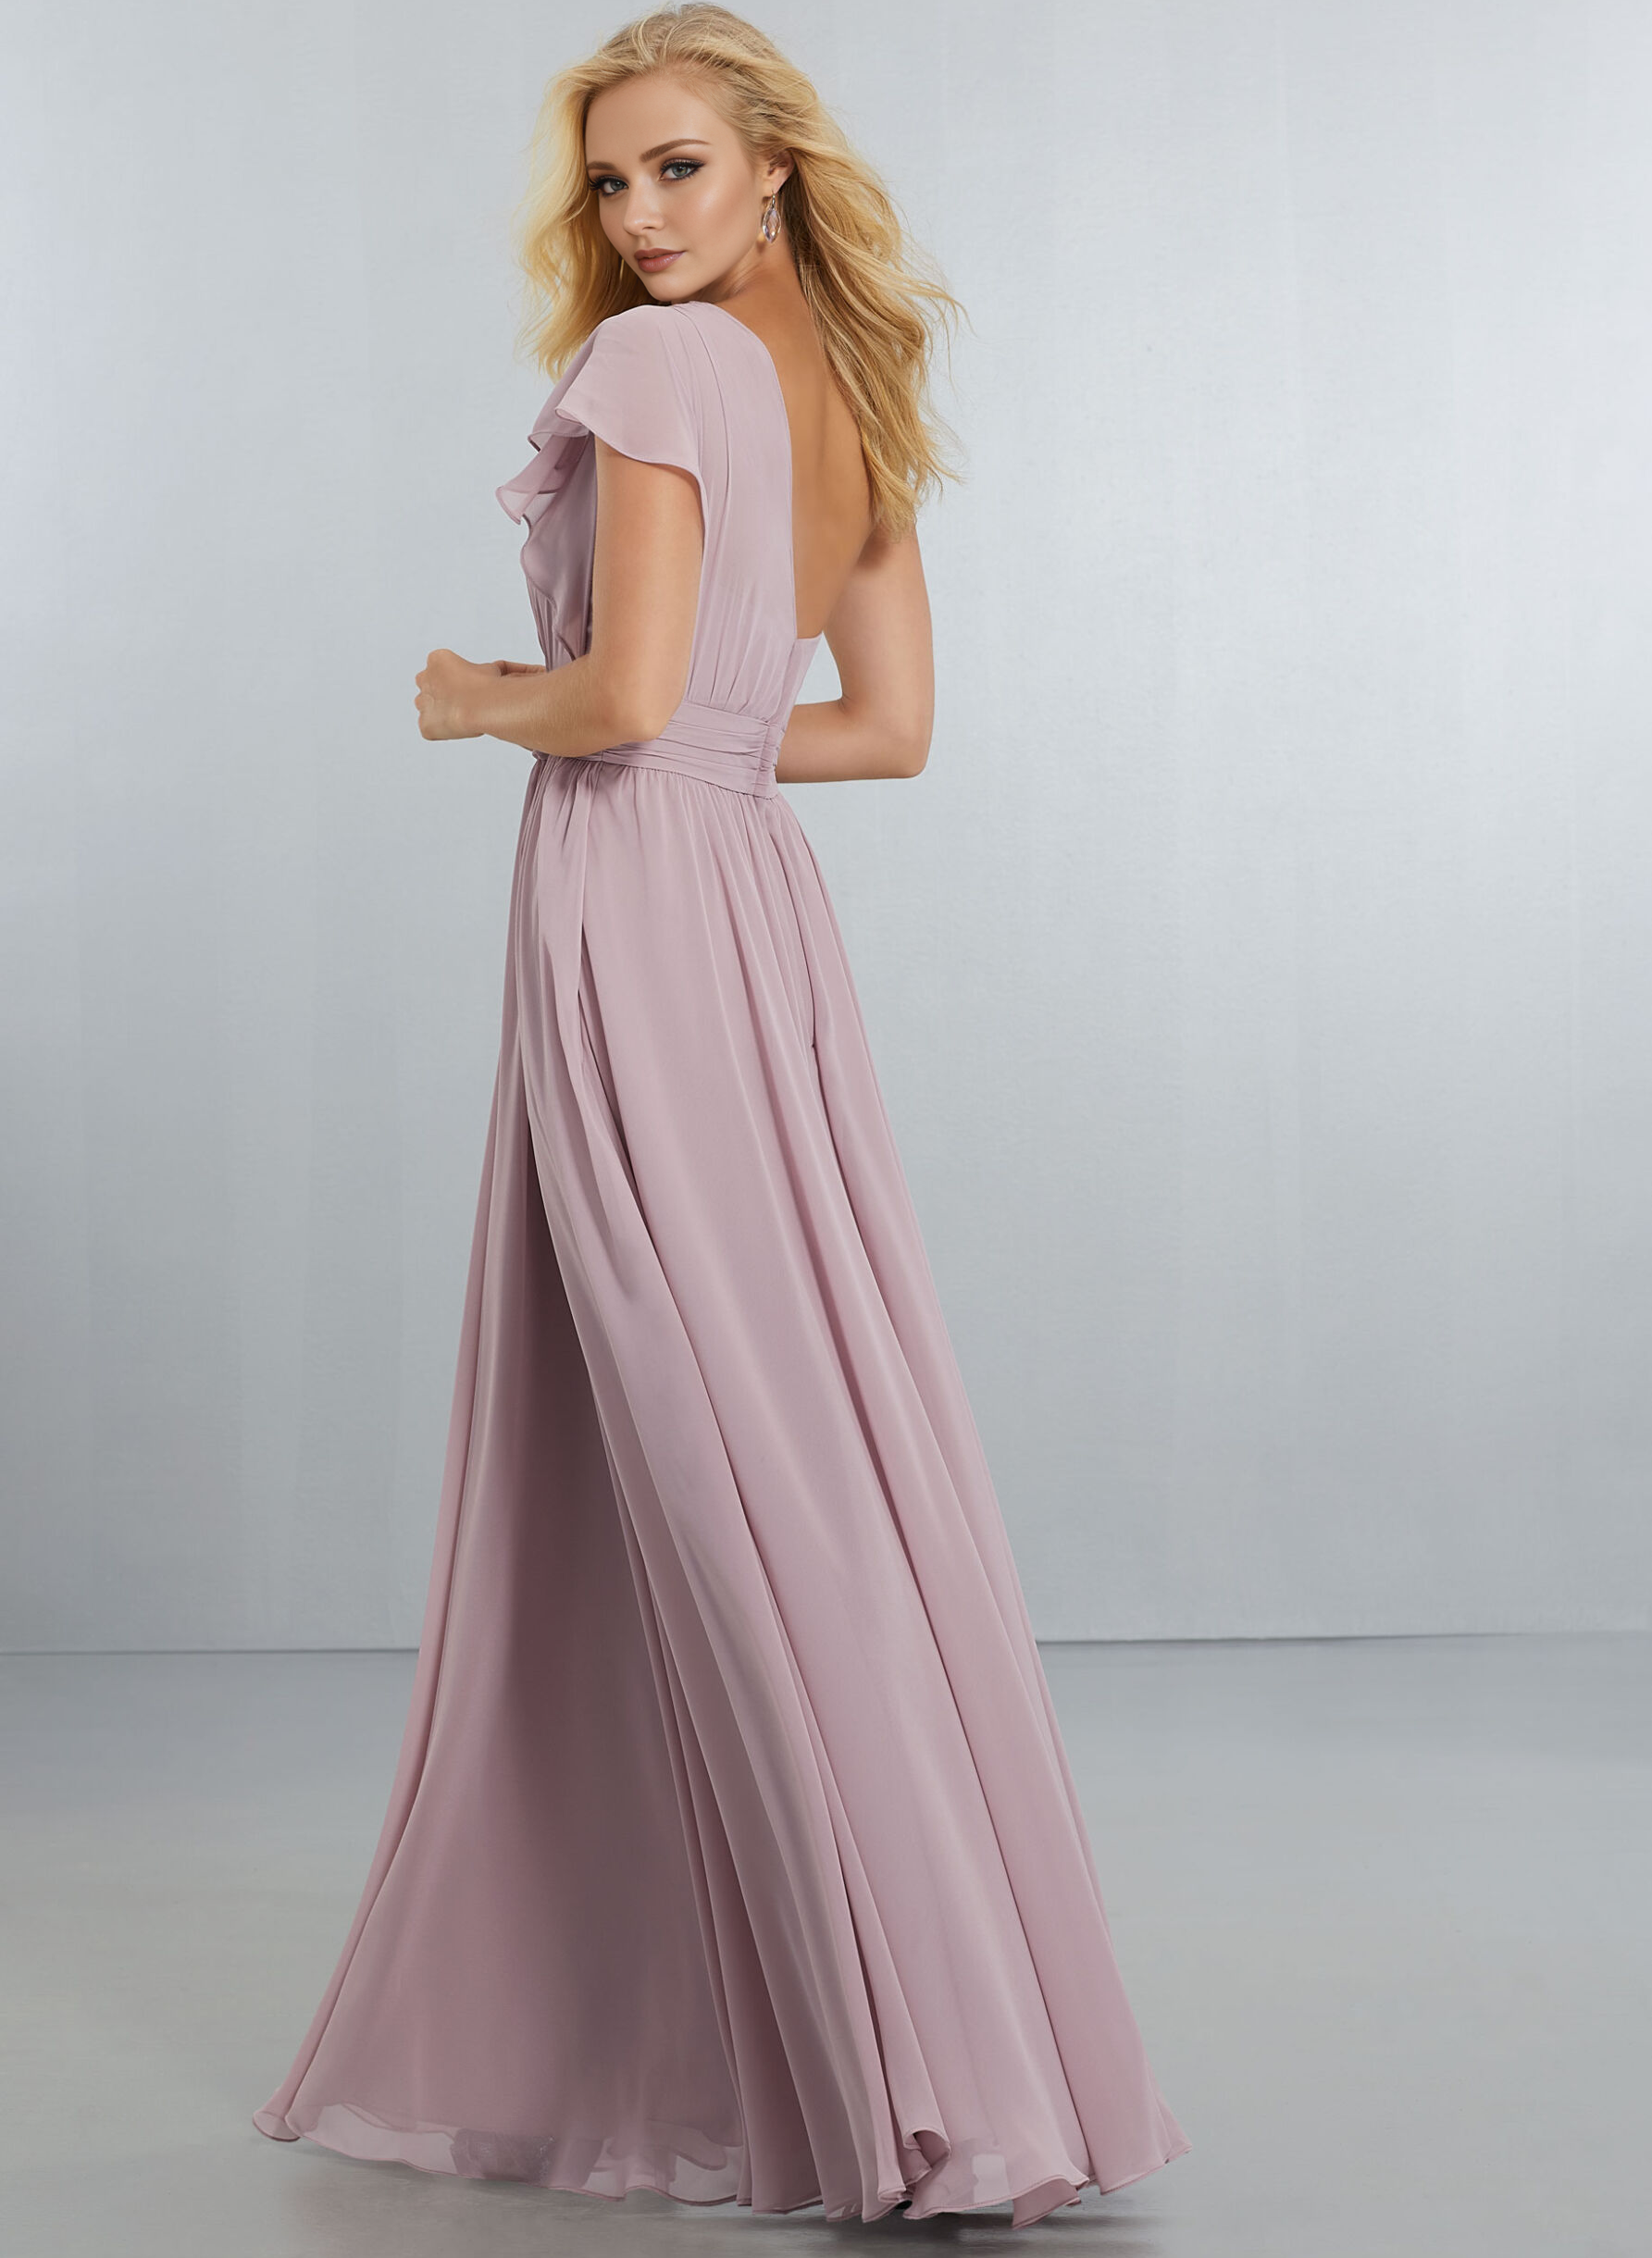 One-Shoulder A-Line Chiffon Bridesmaid Dresses With Pockets